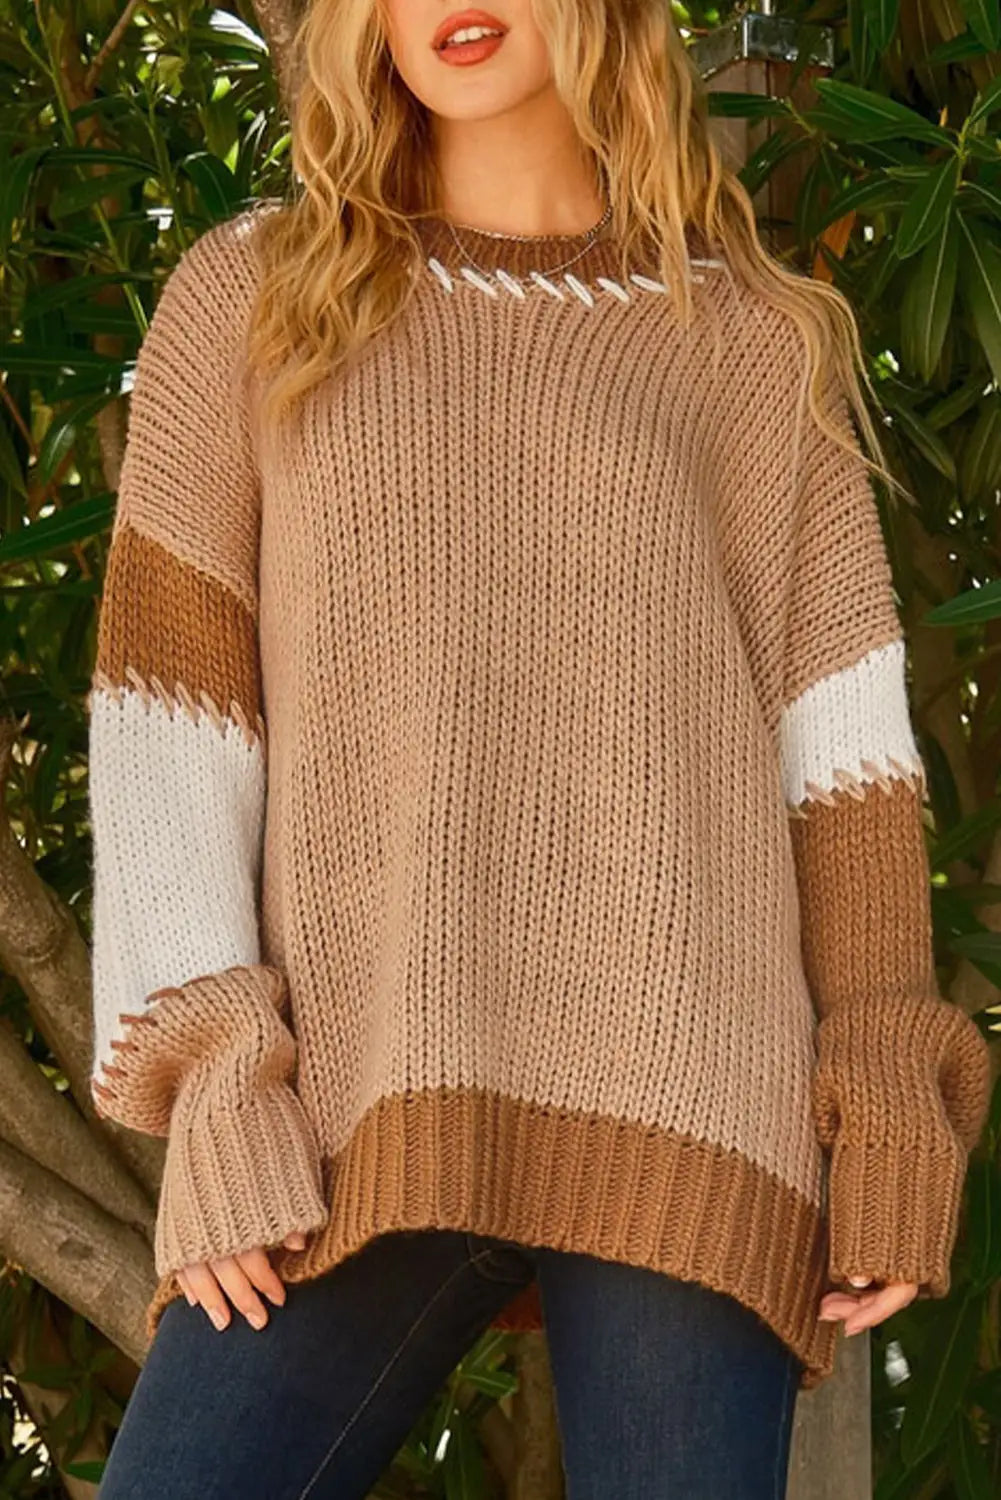 Contrast stitch oversized sweater - light french beige / l / 100% acrylic - sweaters & cardigans